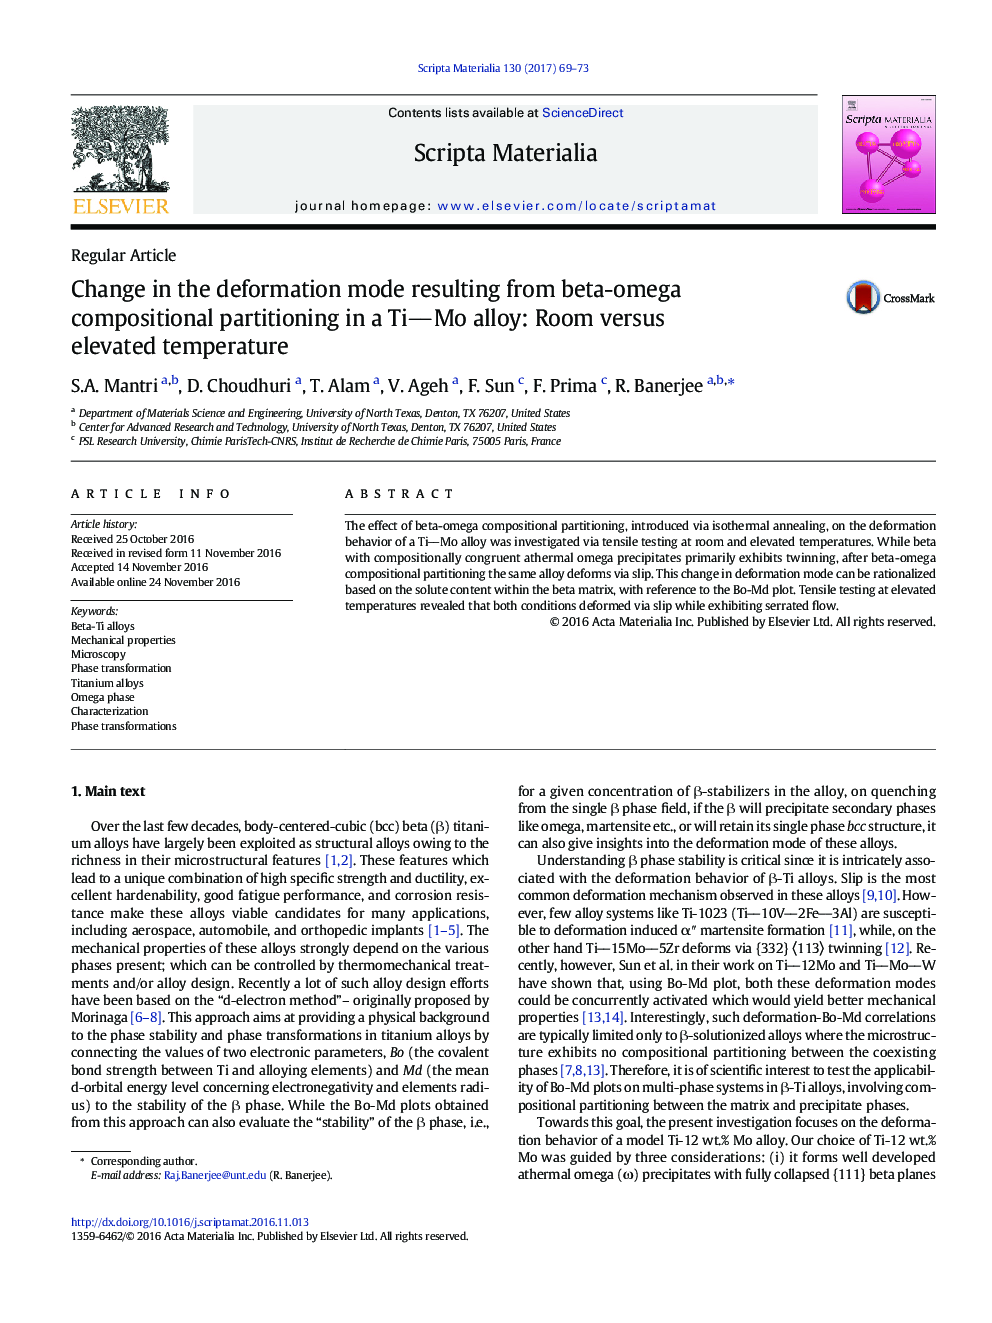 Change in the deformation mode resulting from beta-omega compositional partitioning in a TiMo alloy: Room versus elevated temperature